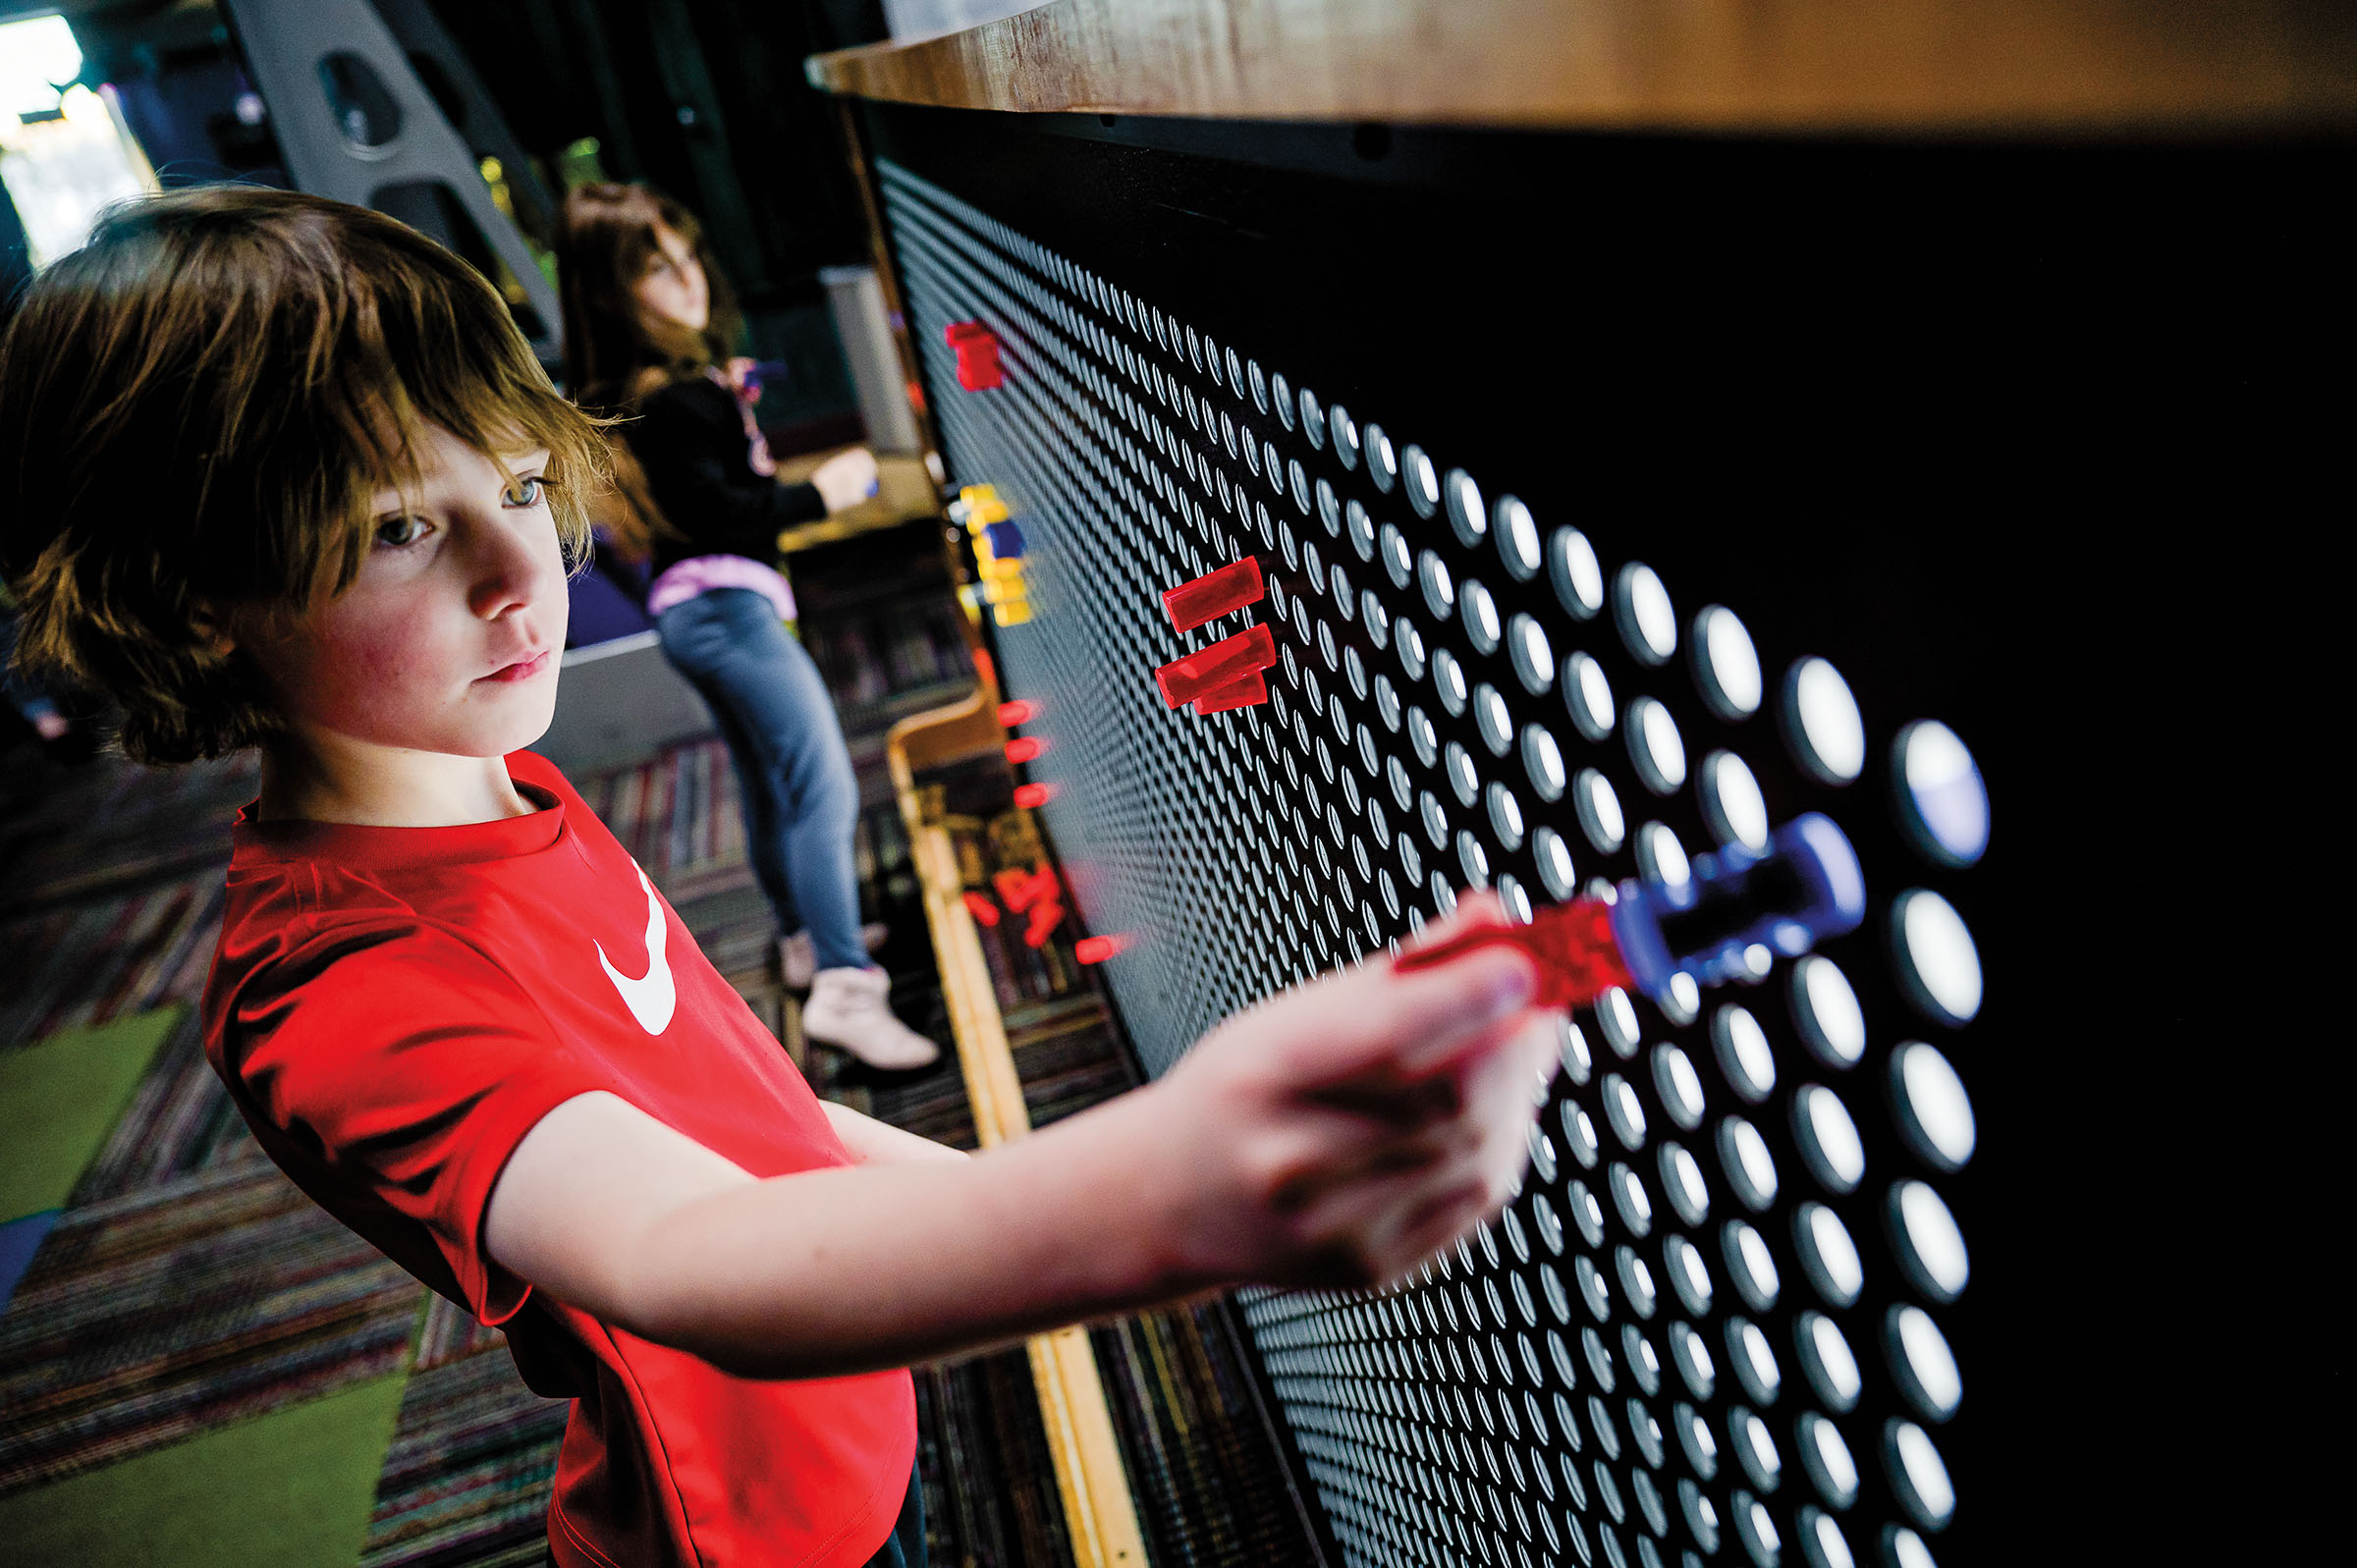 A young person in a red shirt attaches bright plastic pegs to a light-up wall